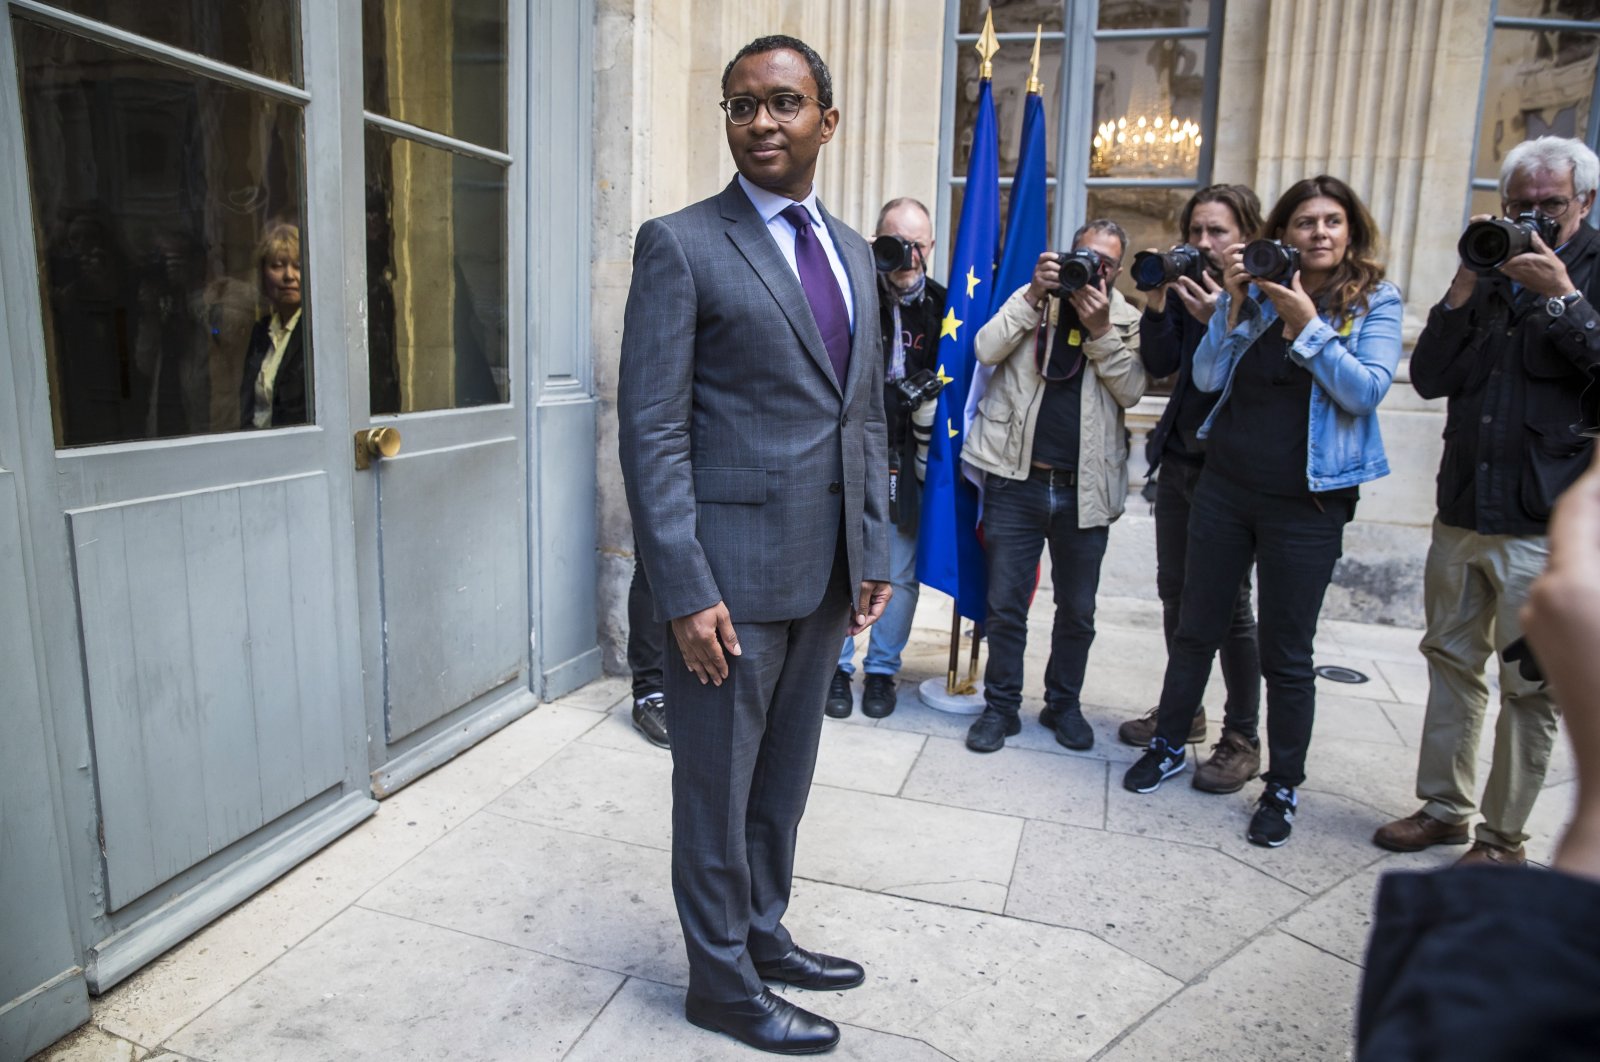 Newly-appointed French Education Minister Pap Ndiaye poses for photographs after the handover ceremony, amid attacks by far-right former presidential hopefuls, Paris, France, May 21, 2022. (EPA Photo)